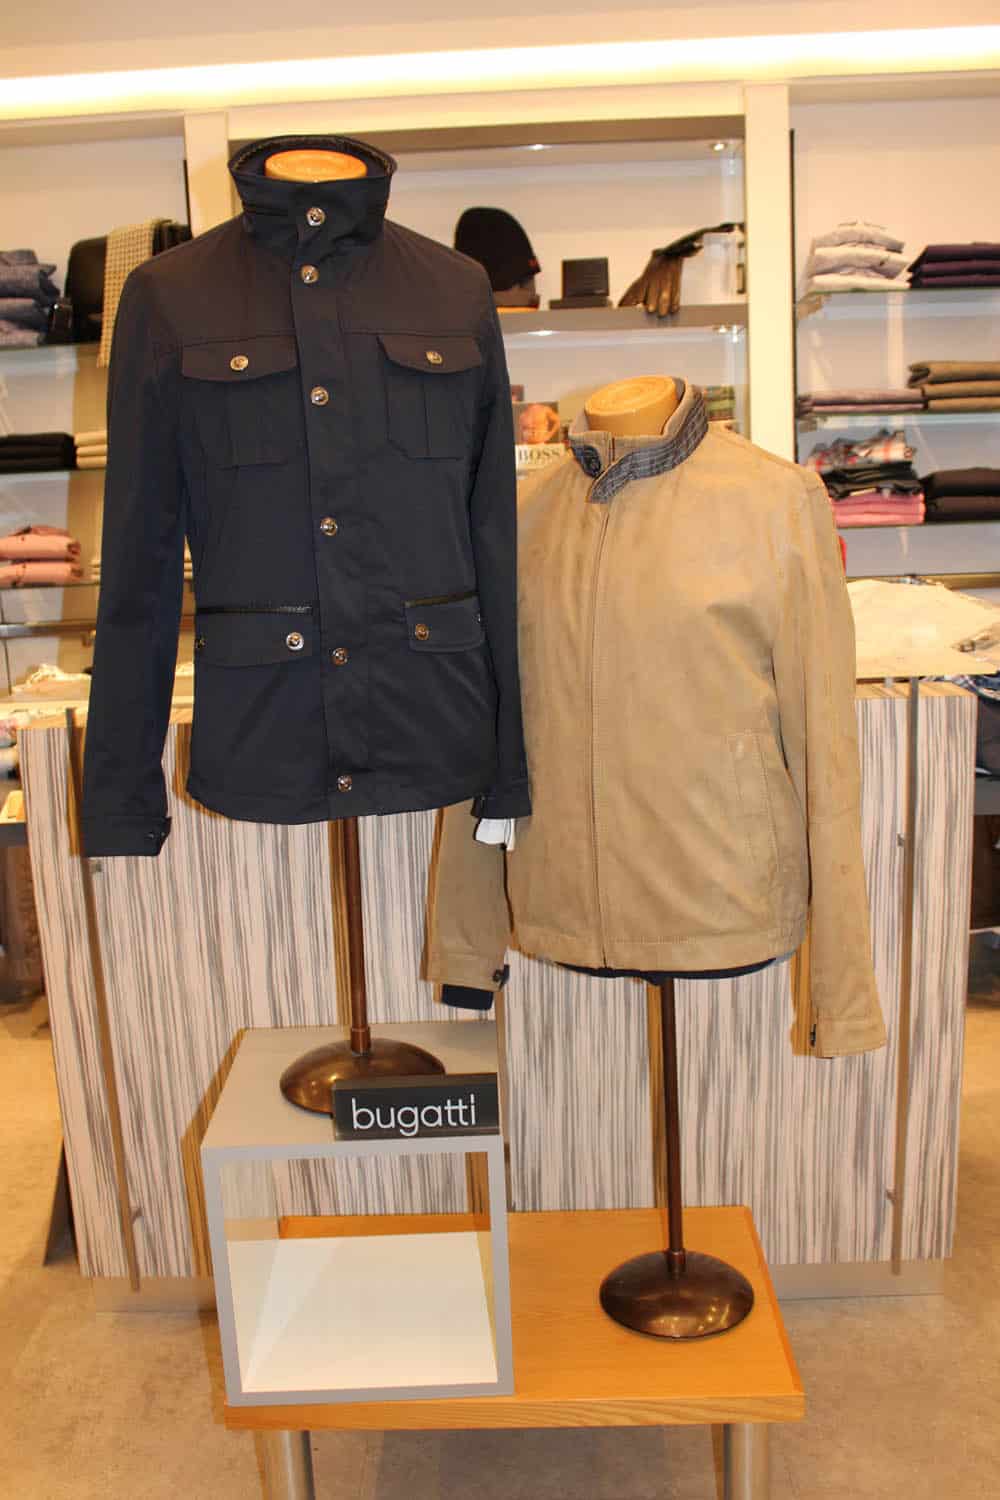 Bugatti Jackets at Robert Smart by Smart Clothes York Yorkshire